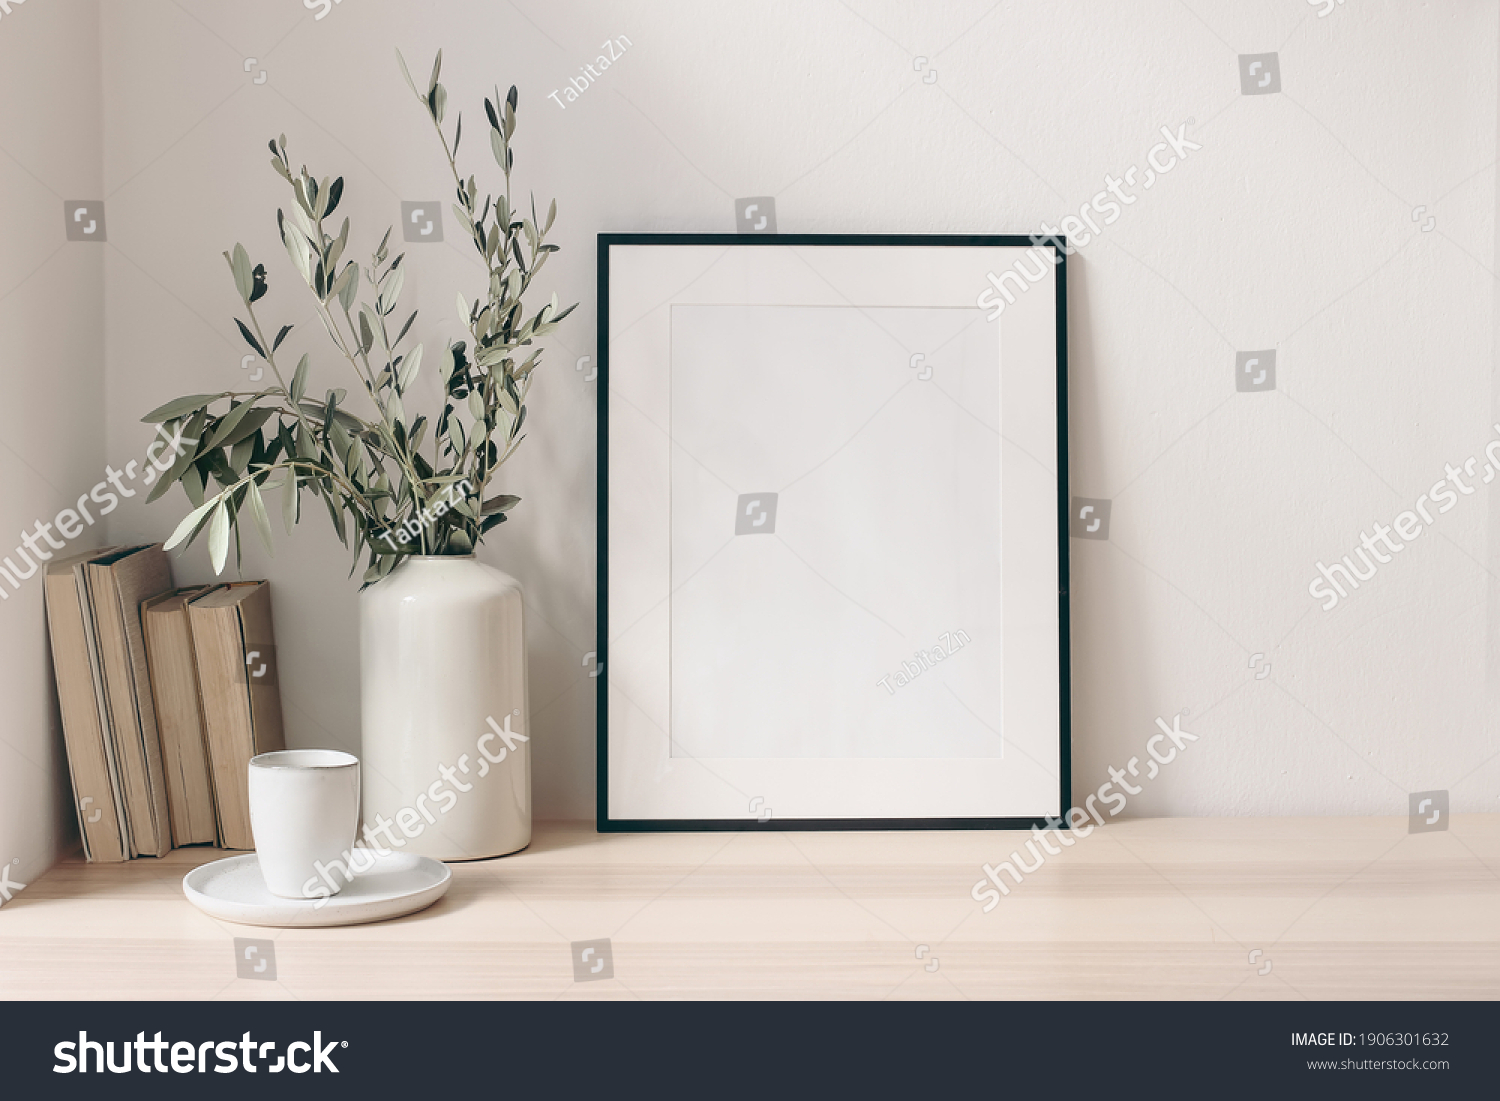 Breakfast still life. Cup of coffee, books and empty picture frame mockup on wooden desk, table. Vase with olive branches. Elegant working space, home office concept. Scandinavian interior design. #1906301632